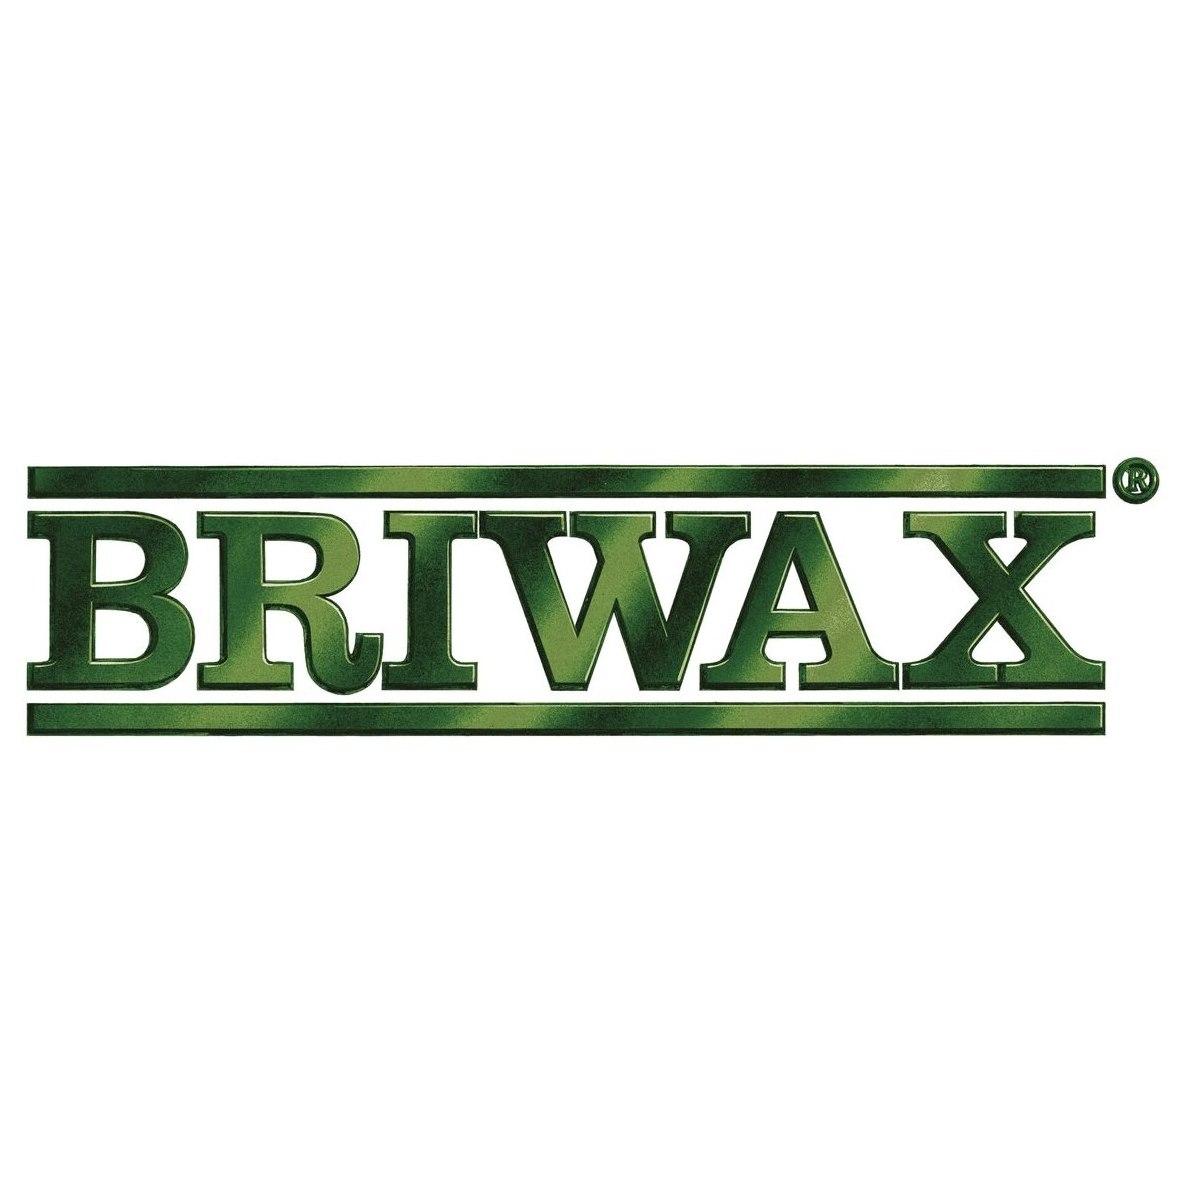 Where to Buy Briwax Products